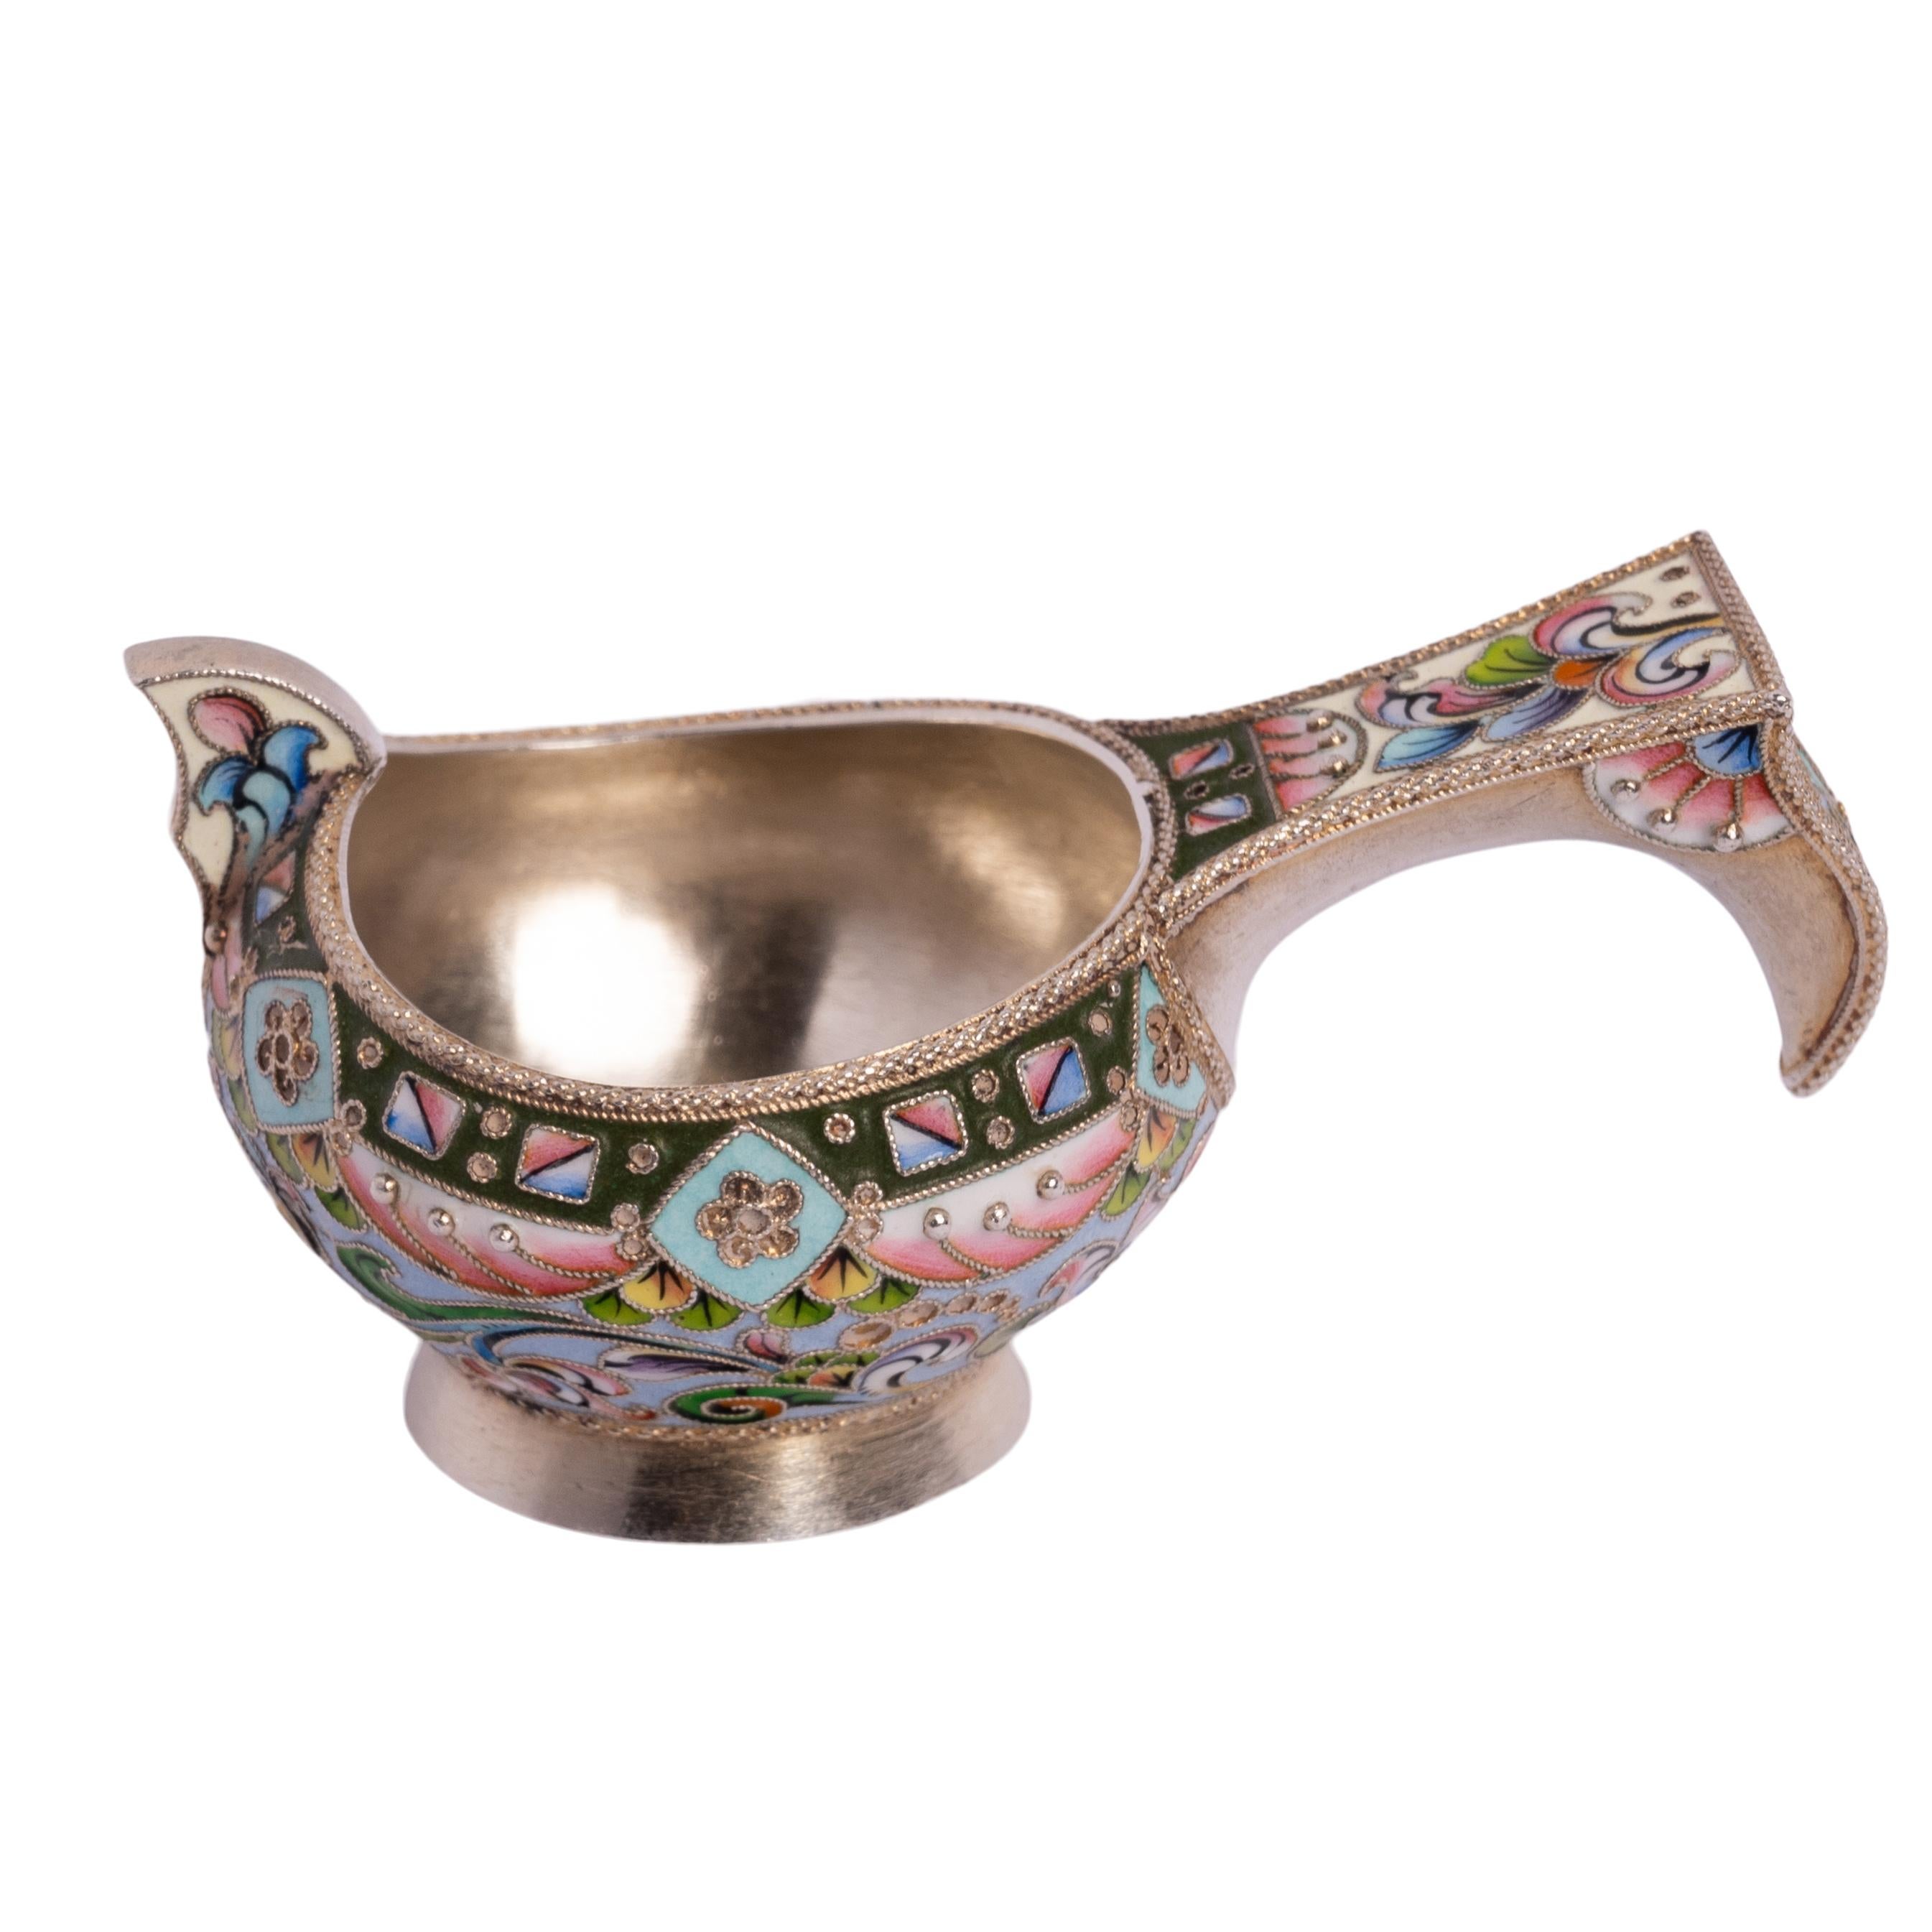 Antique Imperial Russian Solid Silver Gilt Cloisonne Enamel Kovsh Moscow 1908 In Good Condition For Sale In Portland, OR